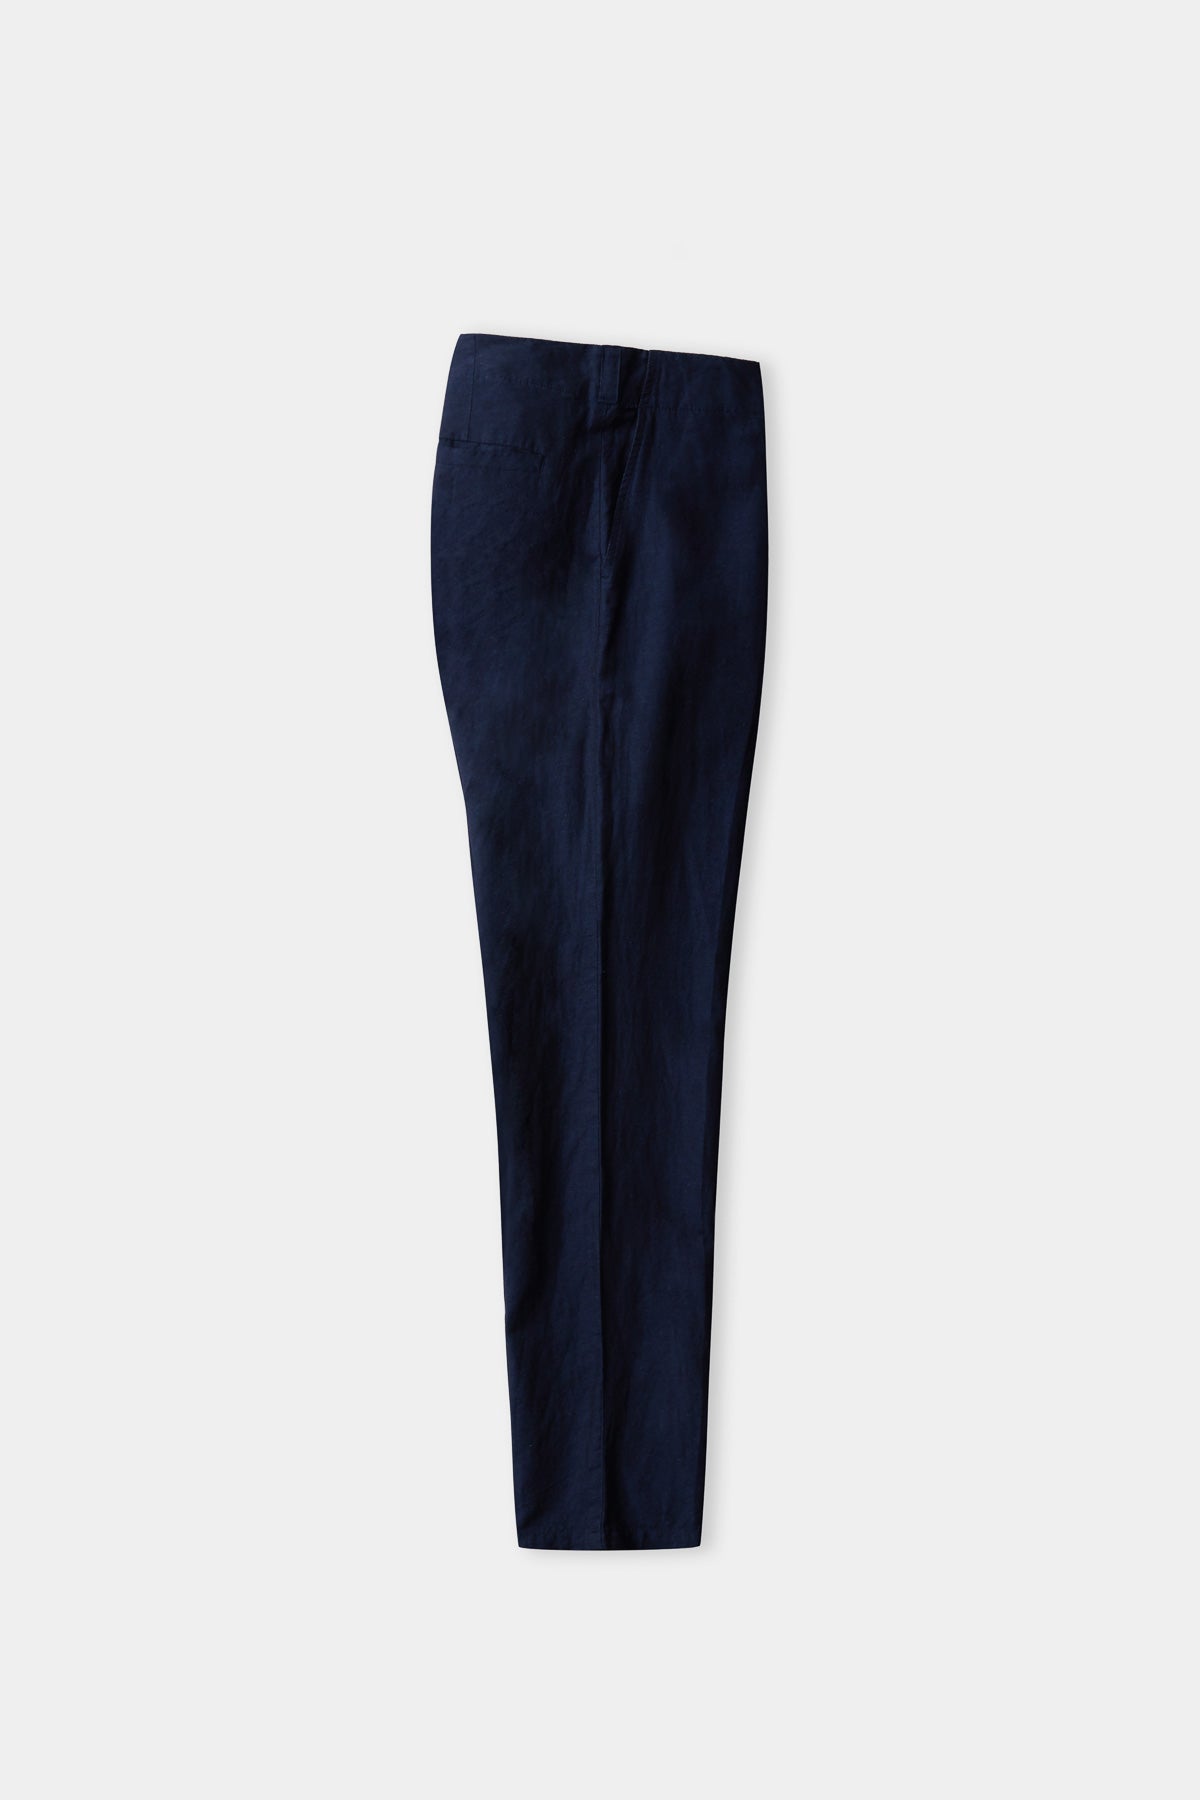 About Companions - JOSTHA trousers navy linen